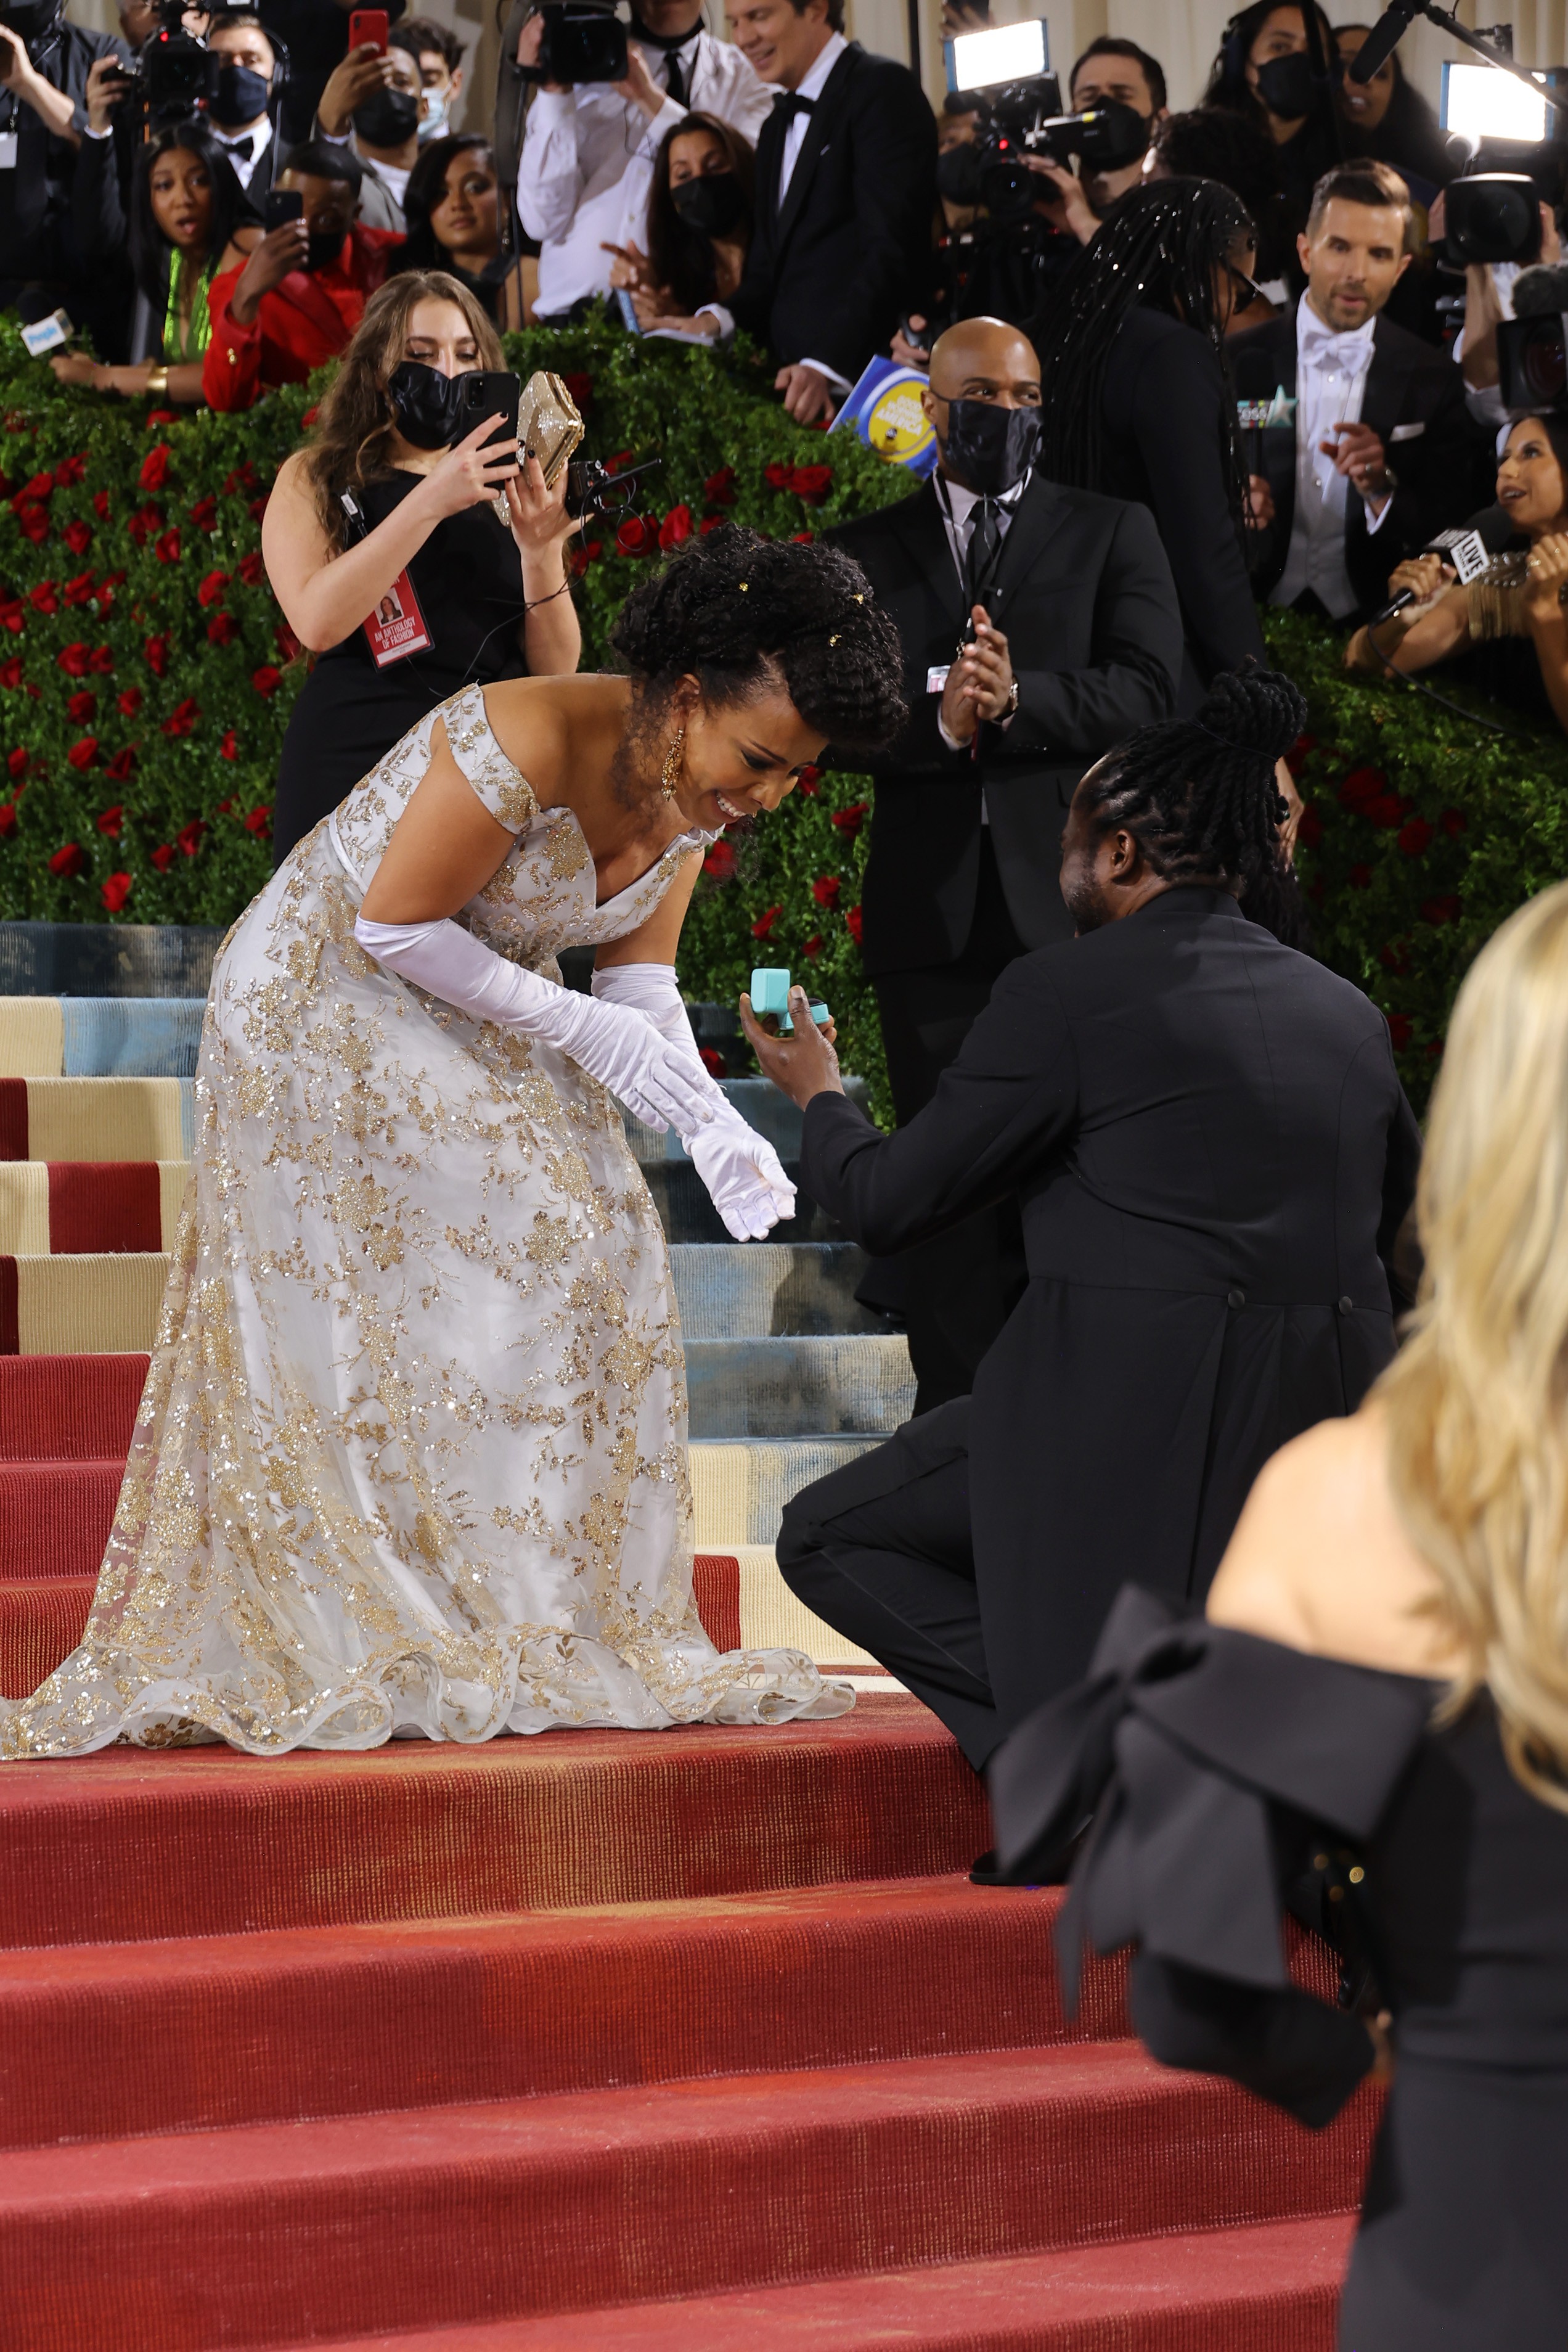 NEW YORK, NEW YORK - MAY 02: Laurie Cumbo gets proposed to on the red carpet at The 2022 Met Gala Celebrating "In America: An Anthology of Fashion" at The Metropolitan Museum of Art on May 02, 2022 in New York City. (Photo by Mike Coppola/Getty Images) (Foto: Getty Images)